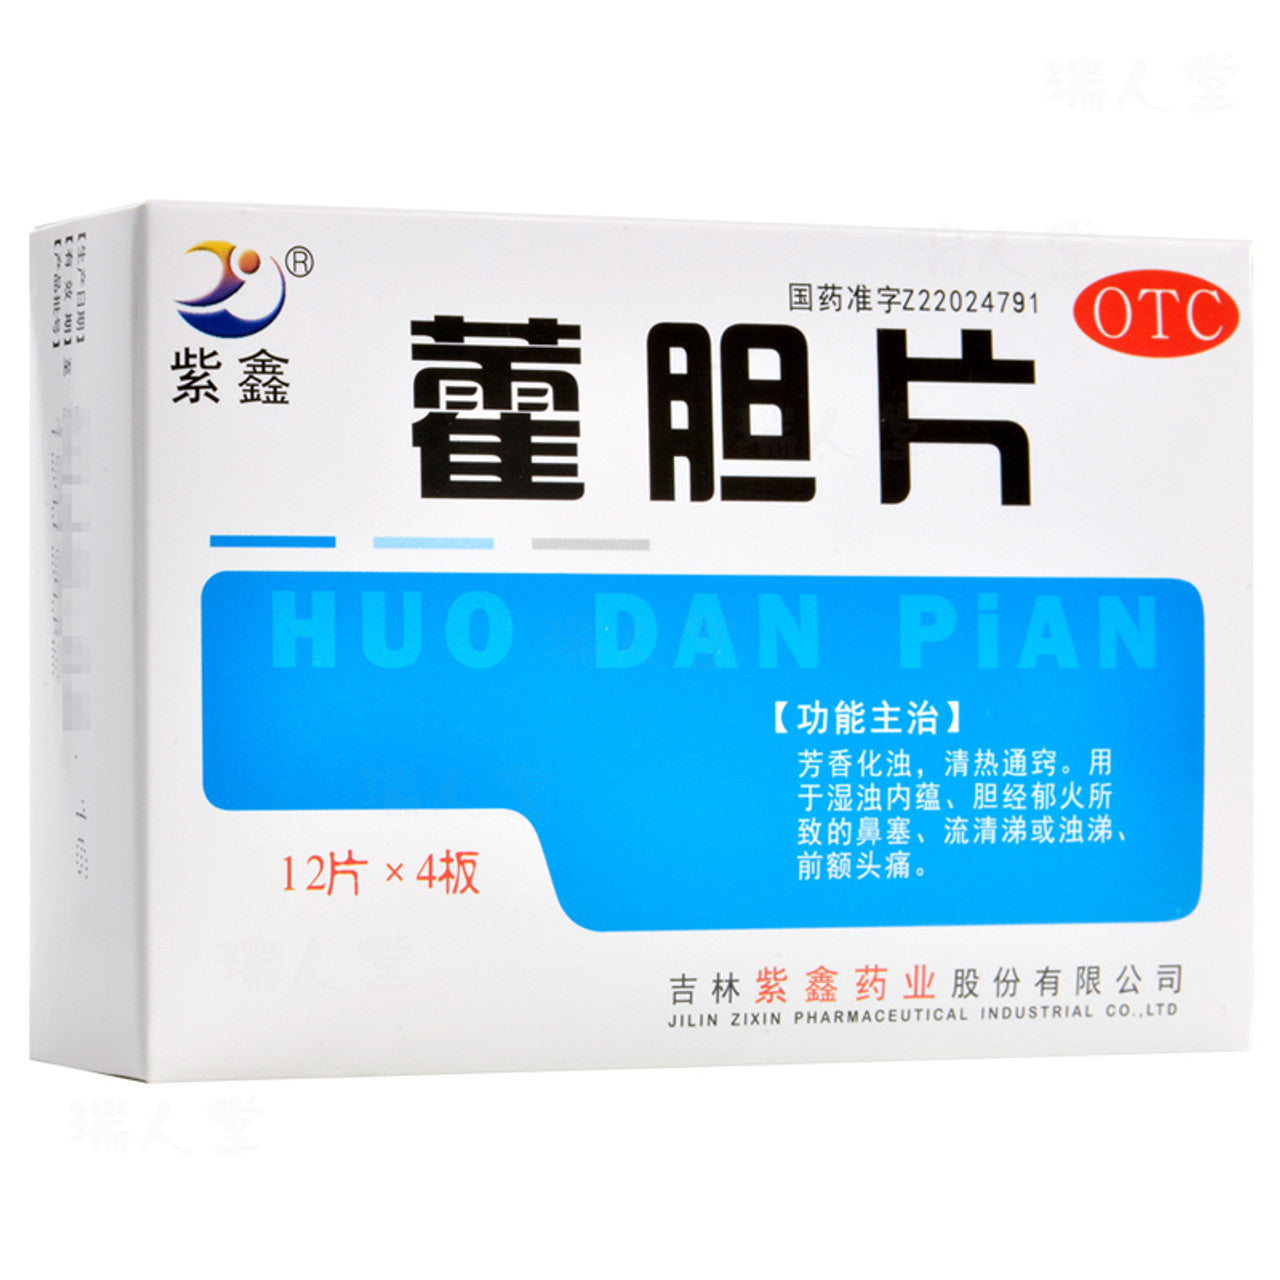 48 Tablets*5 boxes. Traditional Chinese Medicine. Huodan Pian or Huodan Tablets or Huo Dan Pian for Rhinitis.